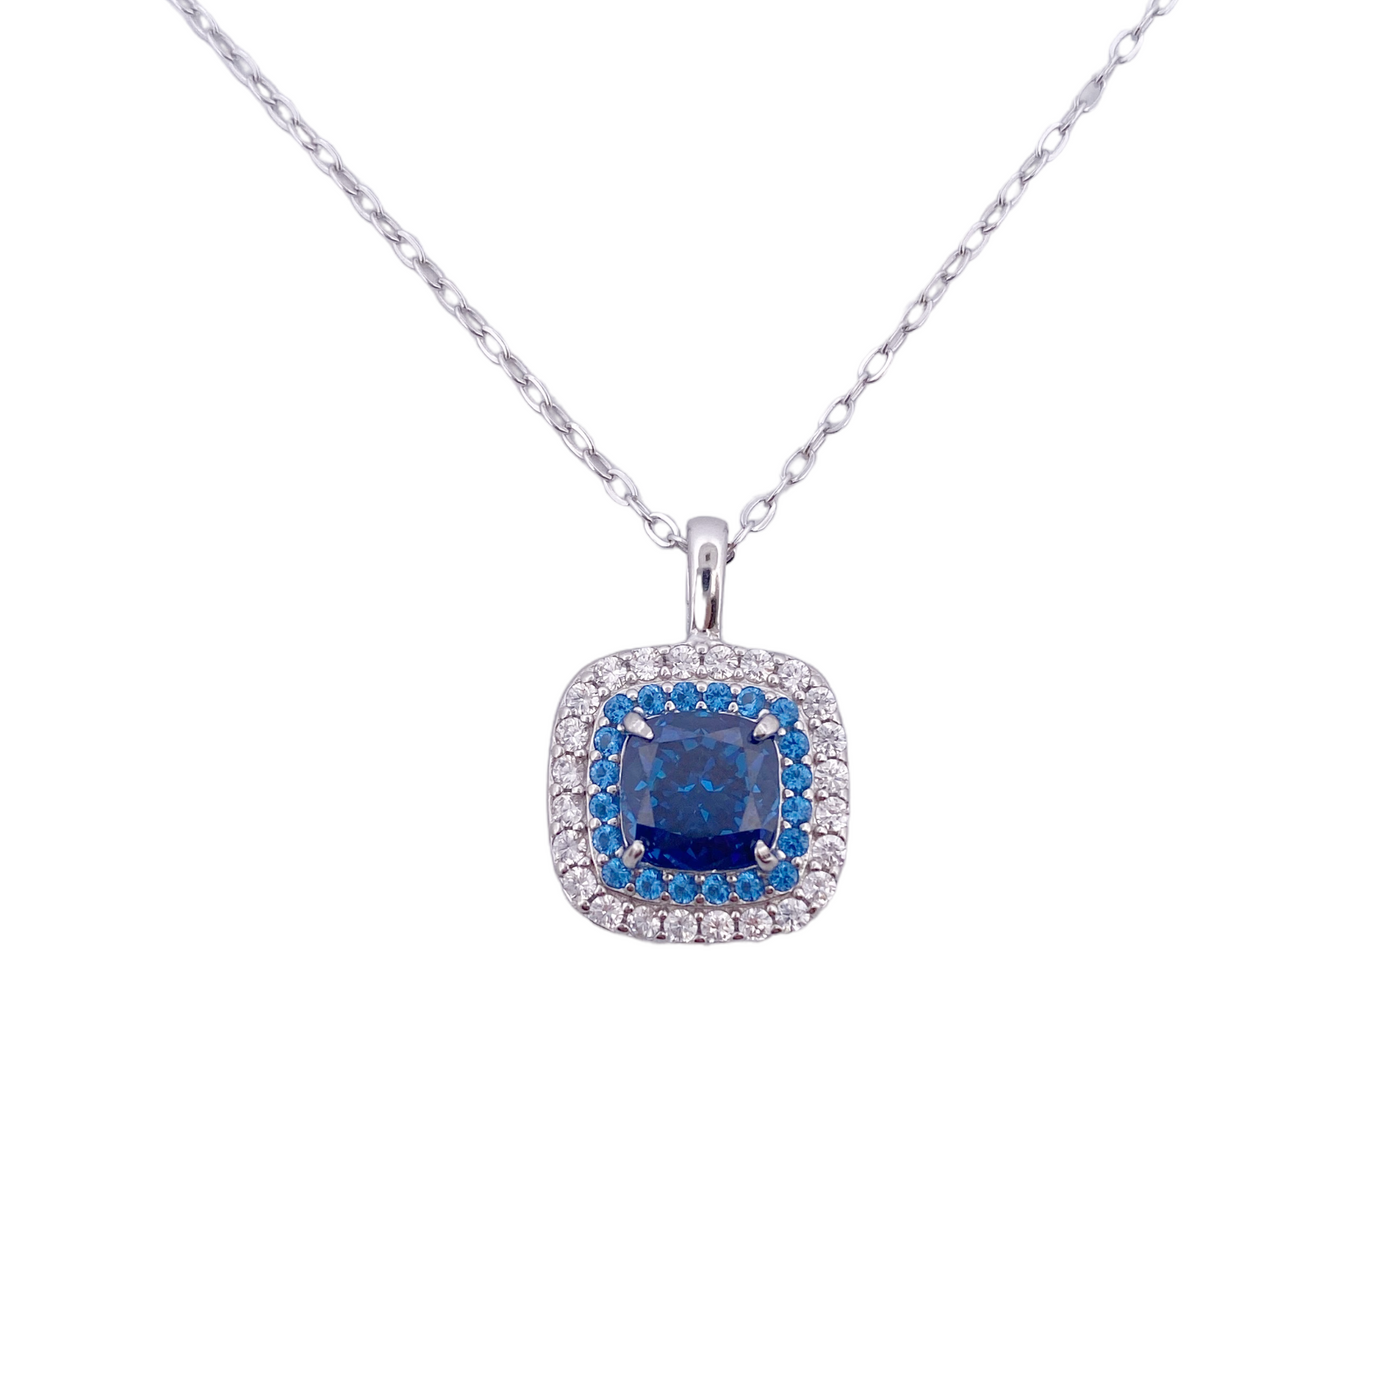 Silver necklace with a cushion diamond replica charm